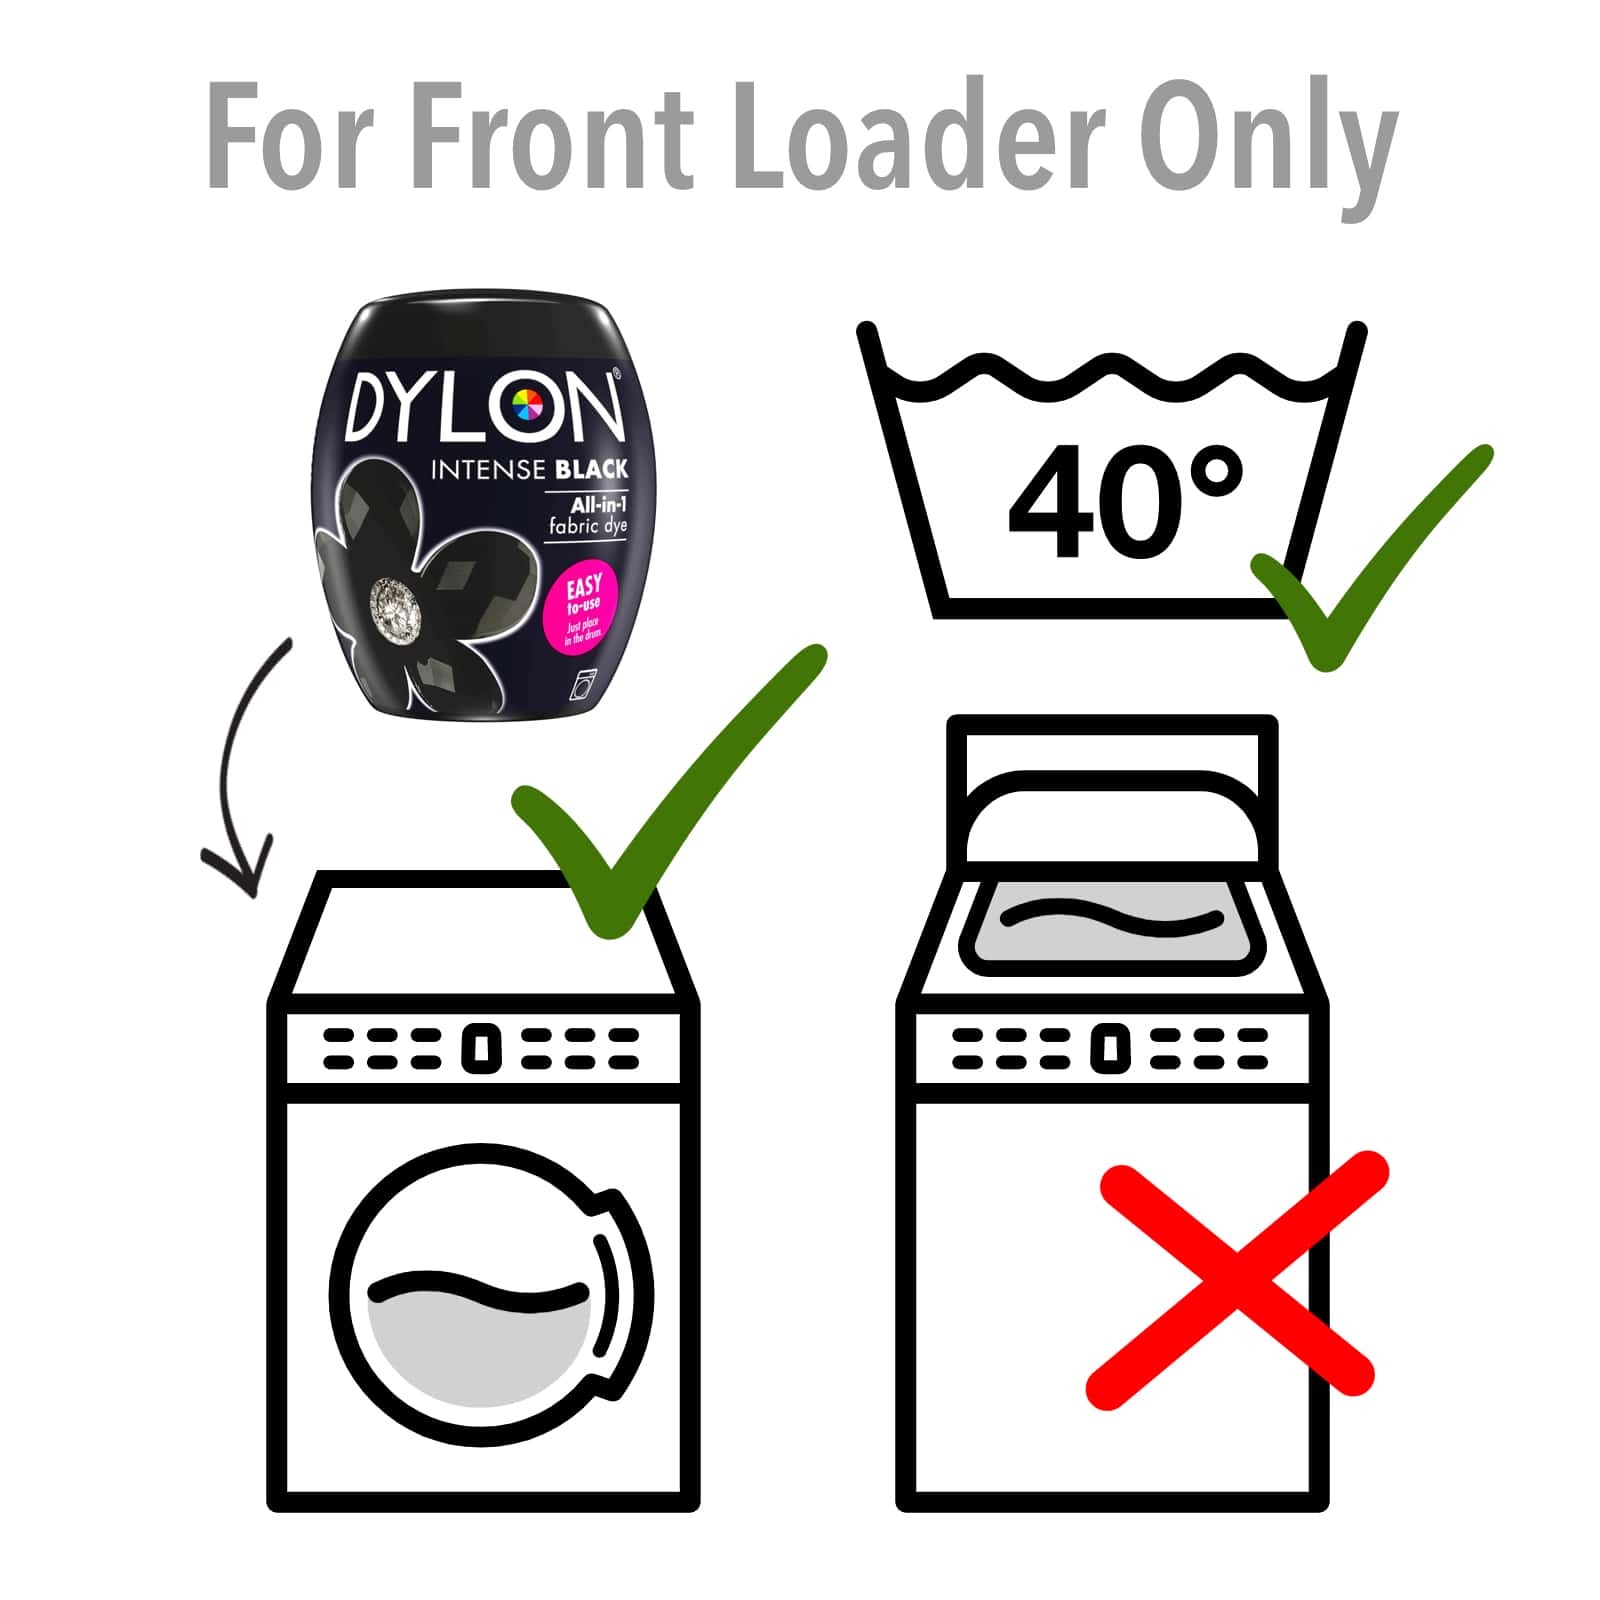 DYEING MY JEANS WITH DYLON: SUPER EASY!!! STEP BY STEP, HOW TO GUIDE. 